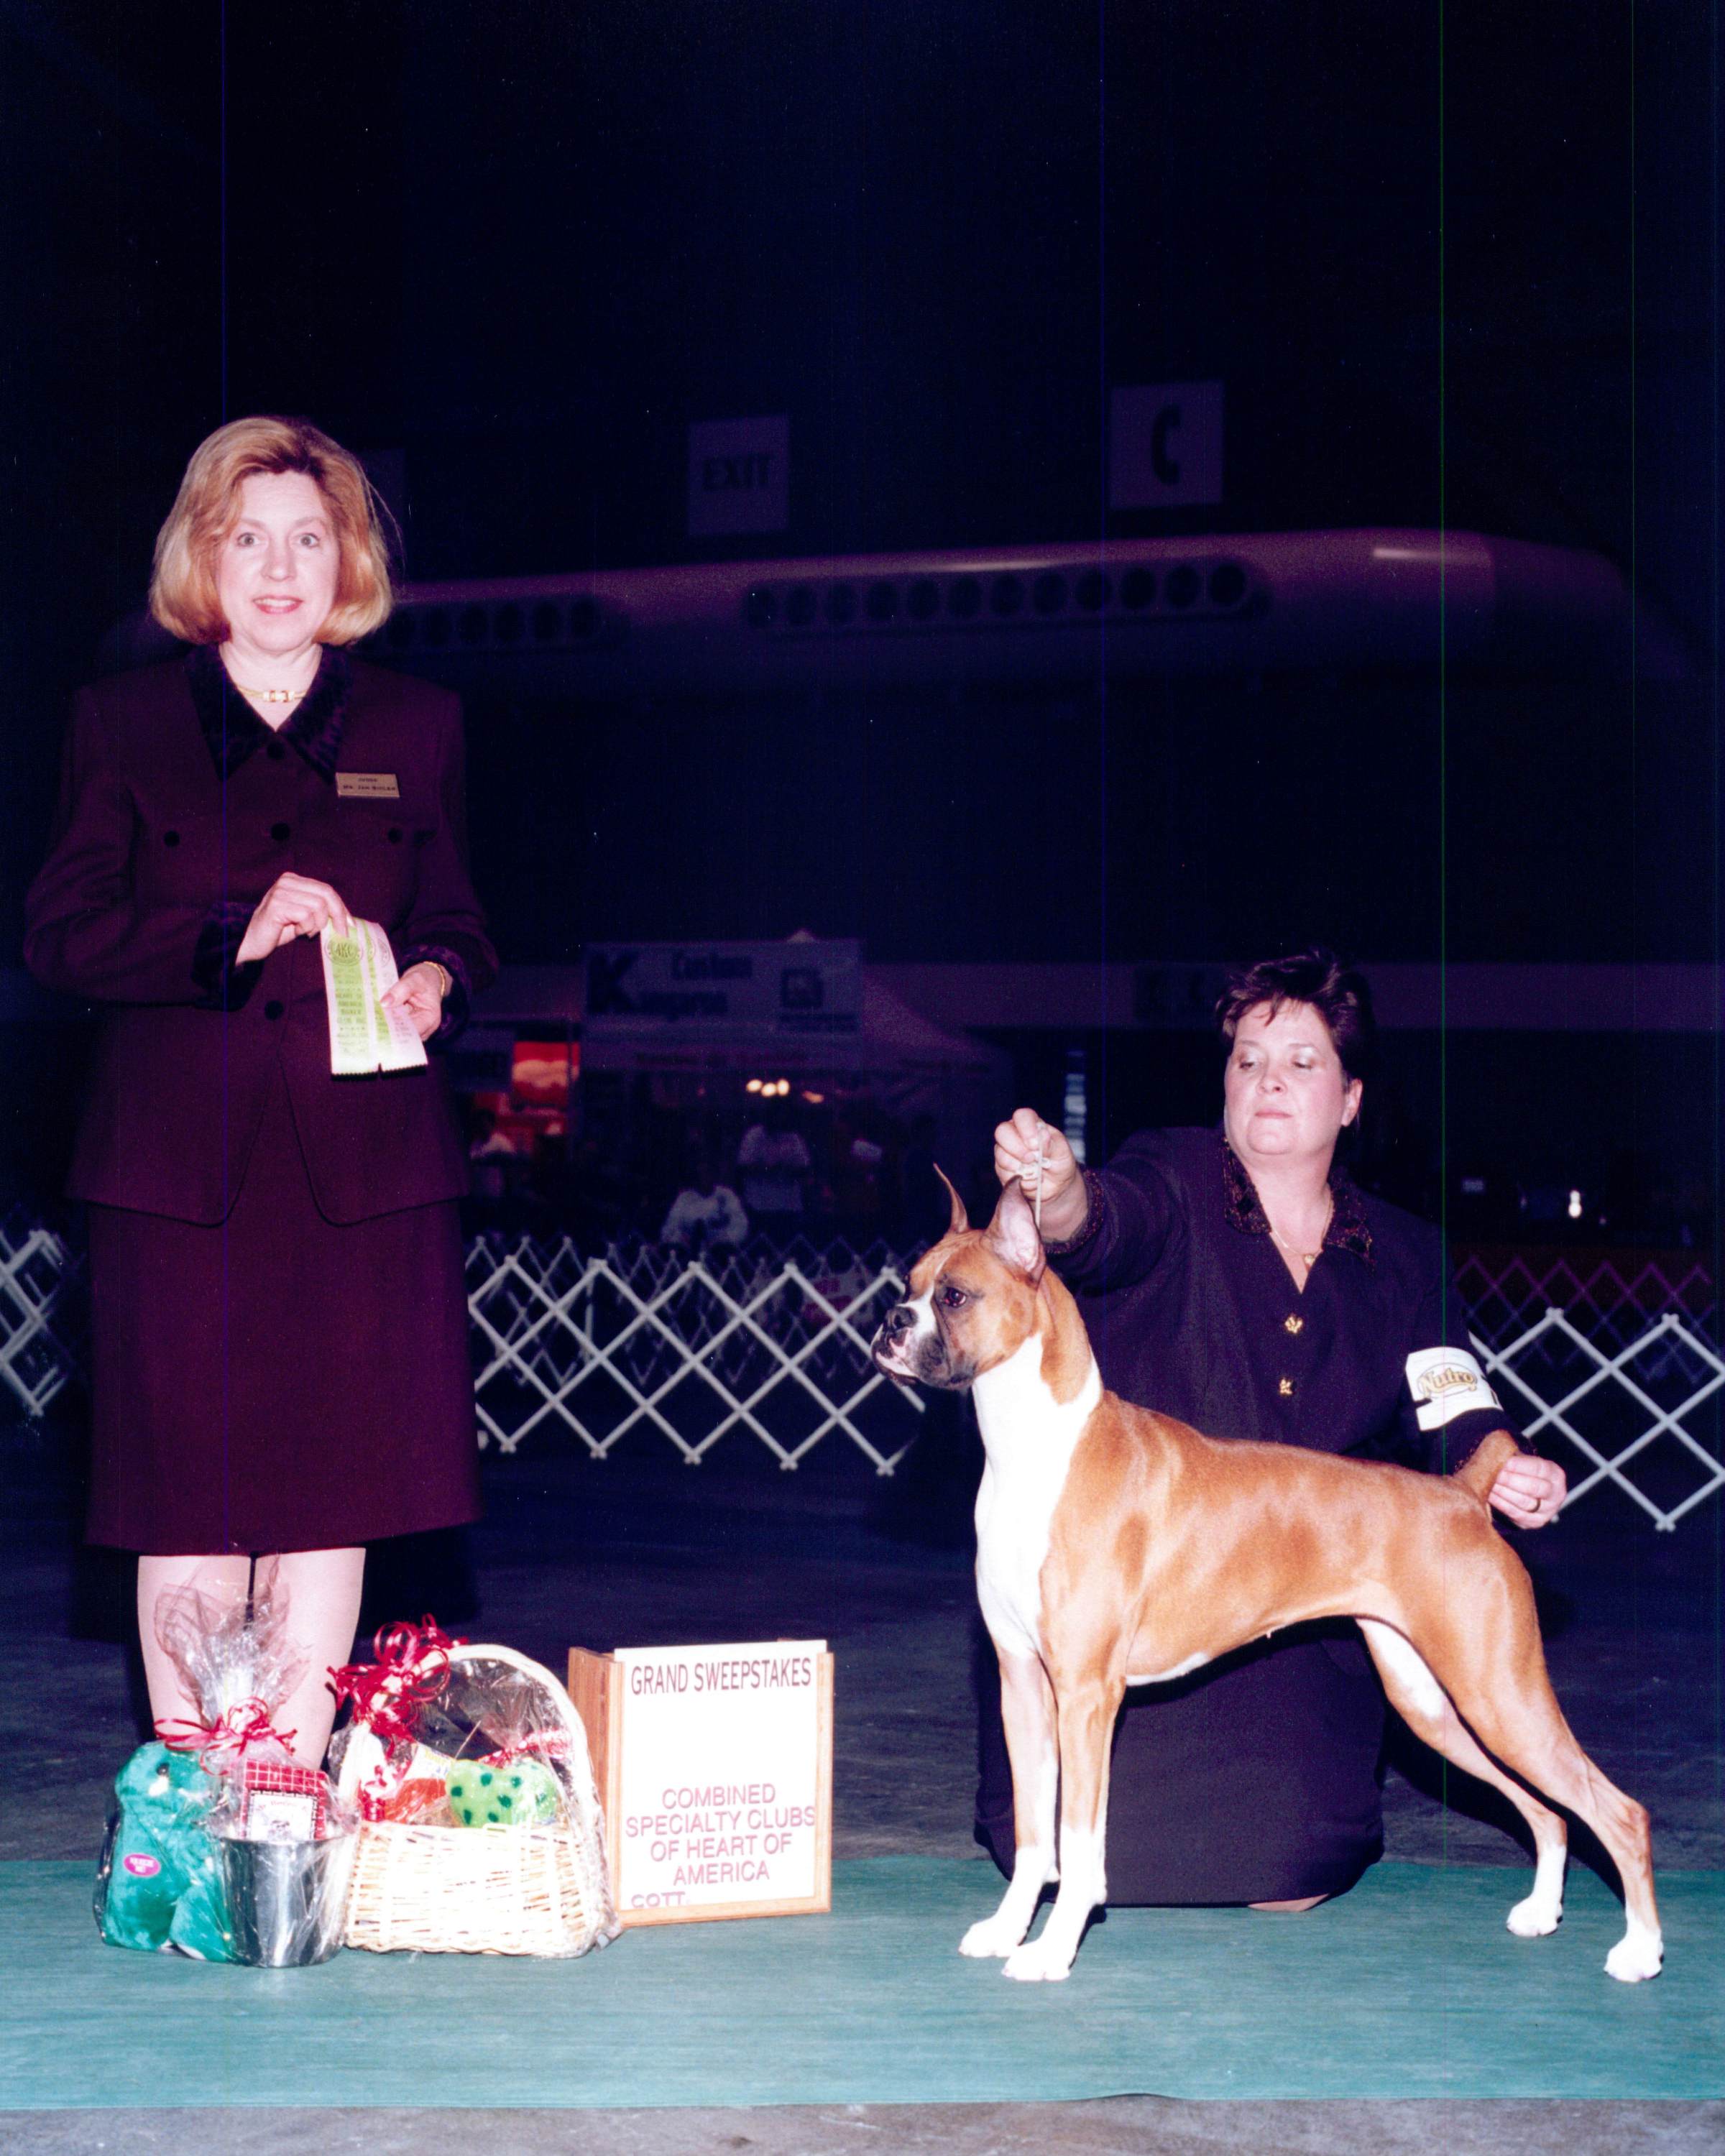 Grand Sweepstakes, Best Junior @ 2001 Specialty Show #1